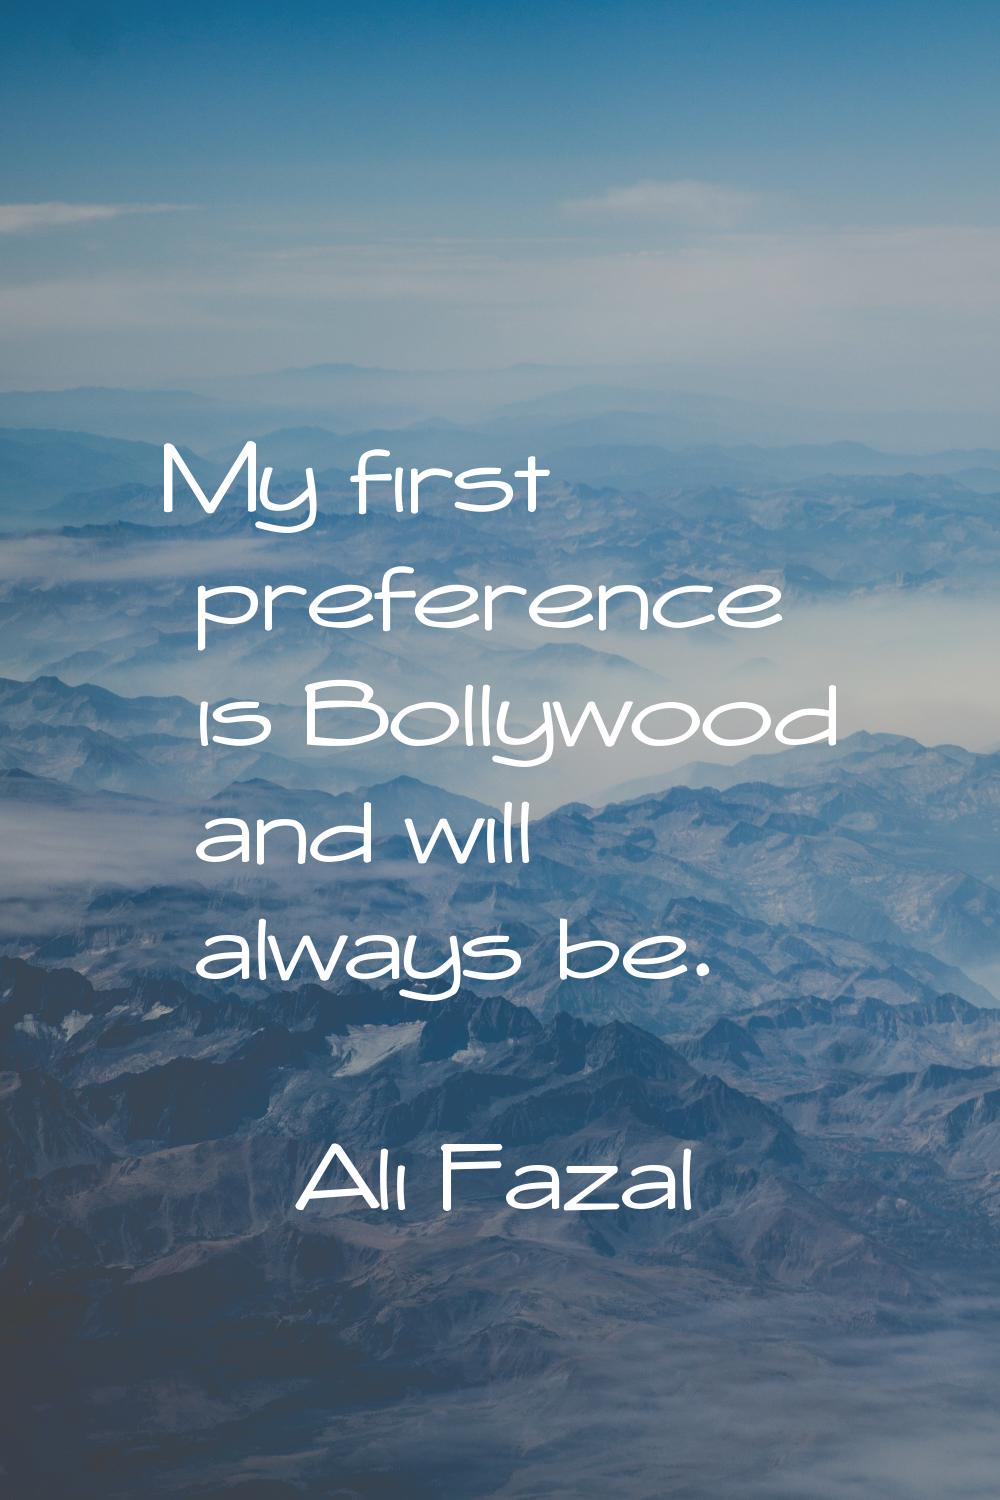 My first preference is Bollywood and will always be.